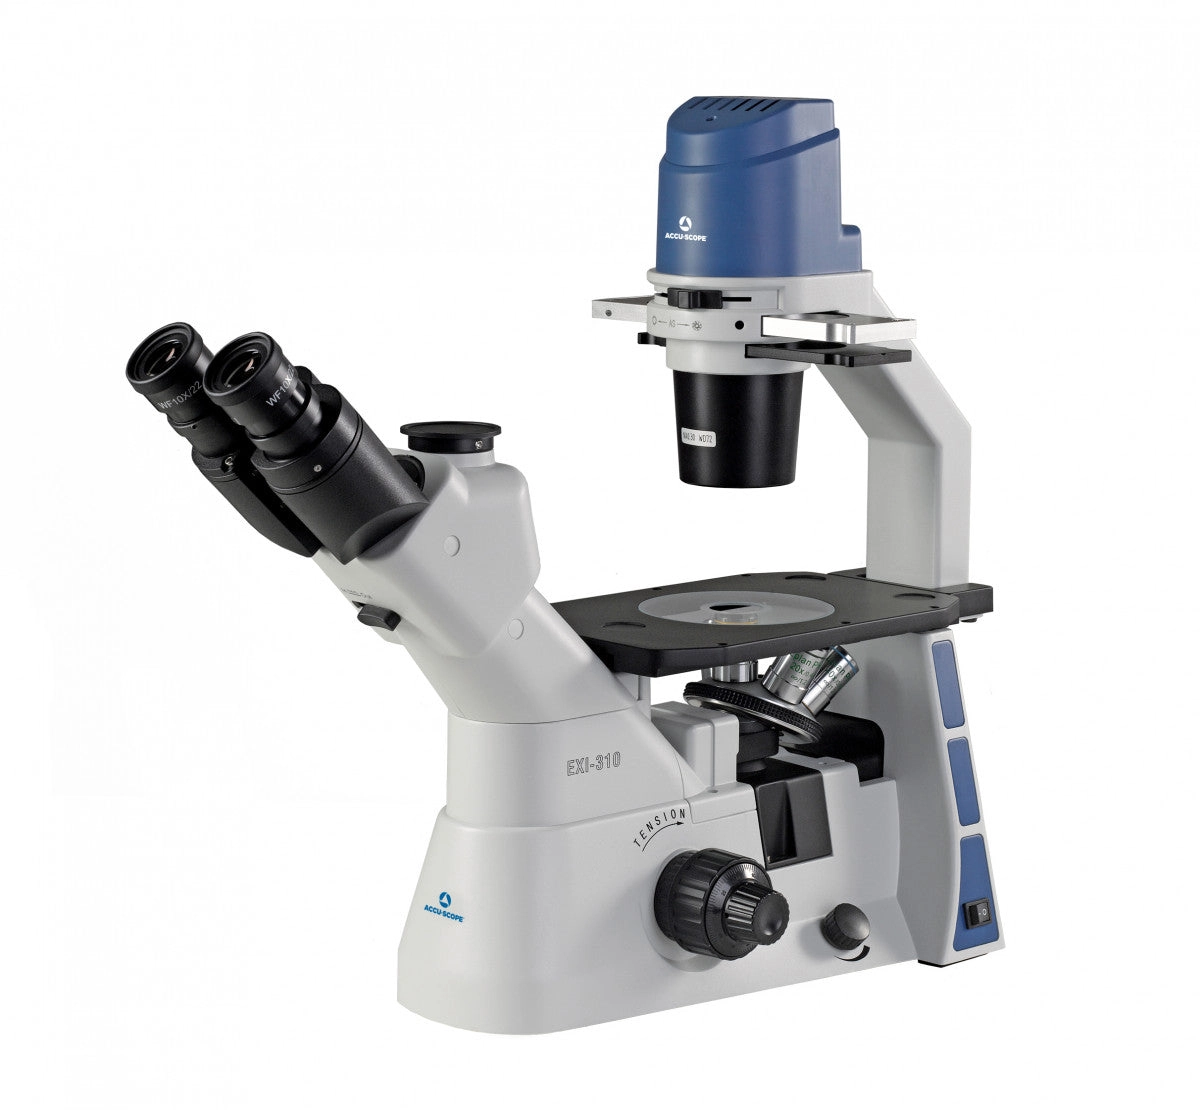 Accu-Scope EXI-310 Inverted Trinocular Microscope with Plan Phase Objectives (Tissue Culture Microscope)